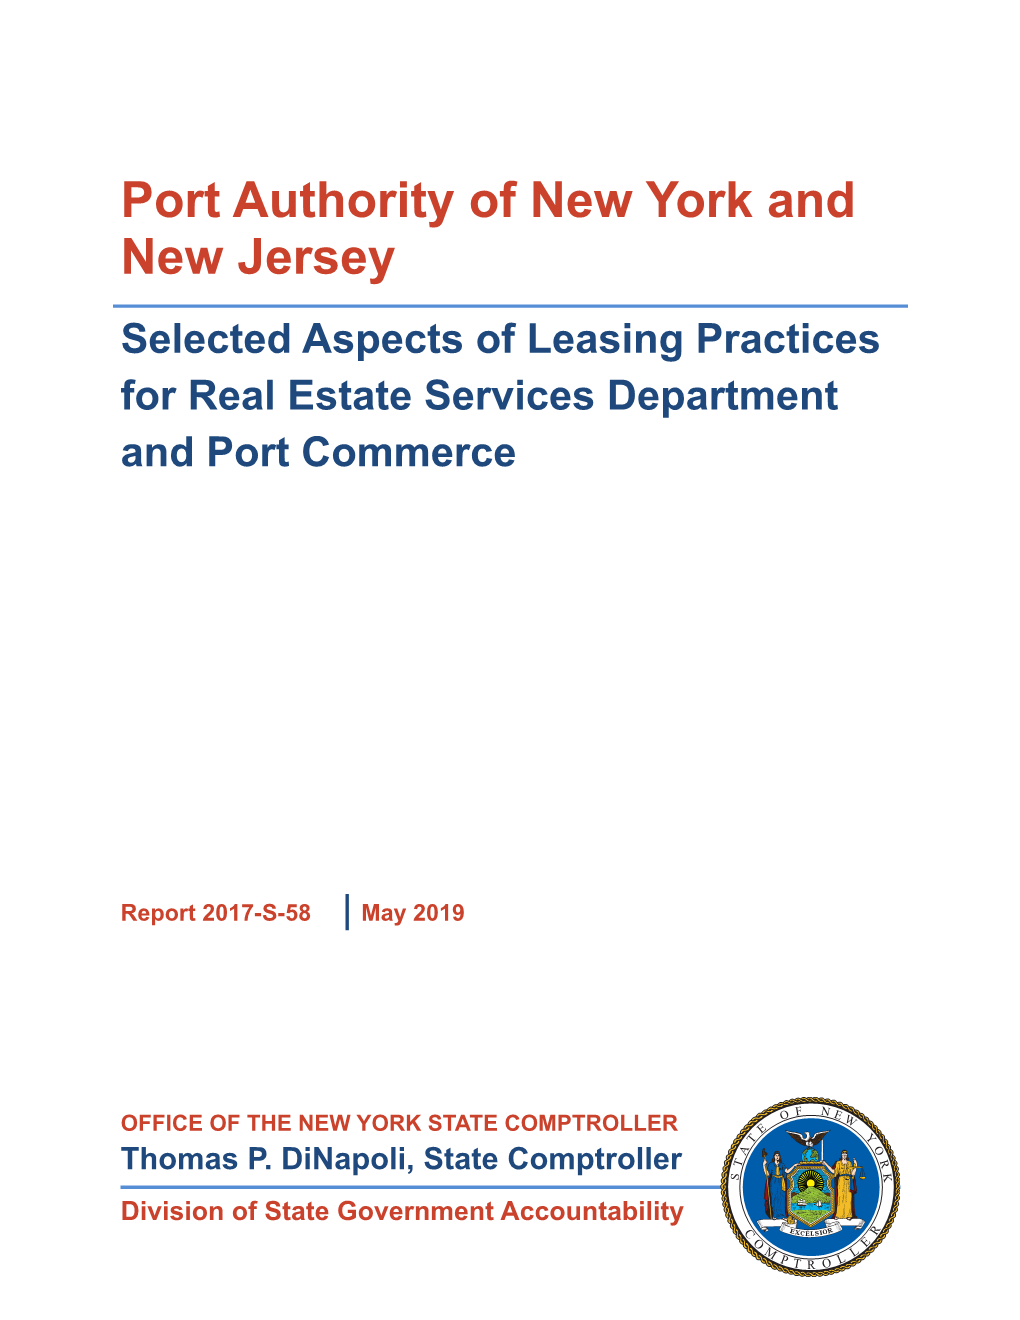 Port Authority of New York and New Jersey Selected Aspects of Leasing Practices for Real Estate Services Department and Port Commerce